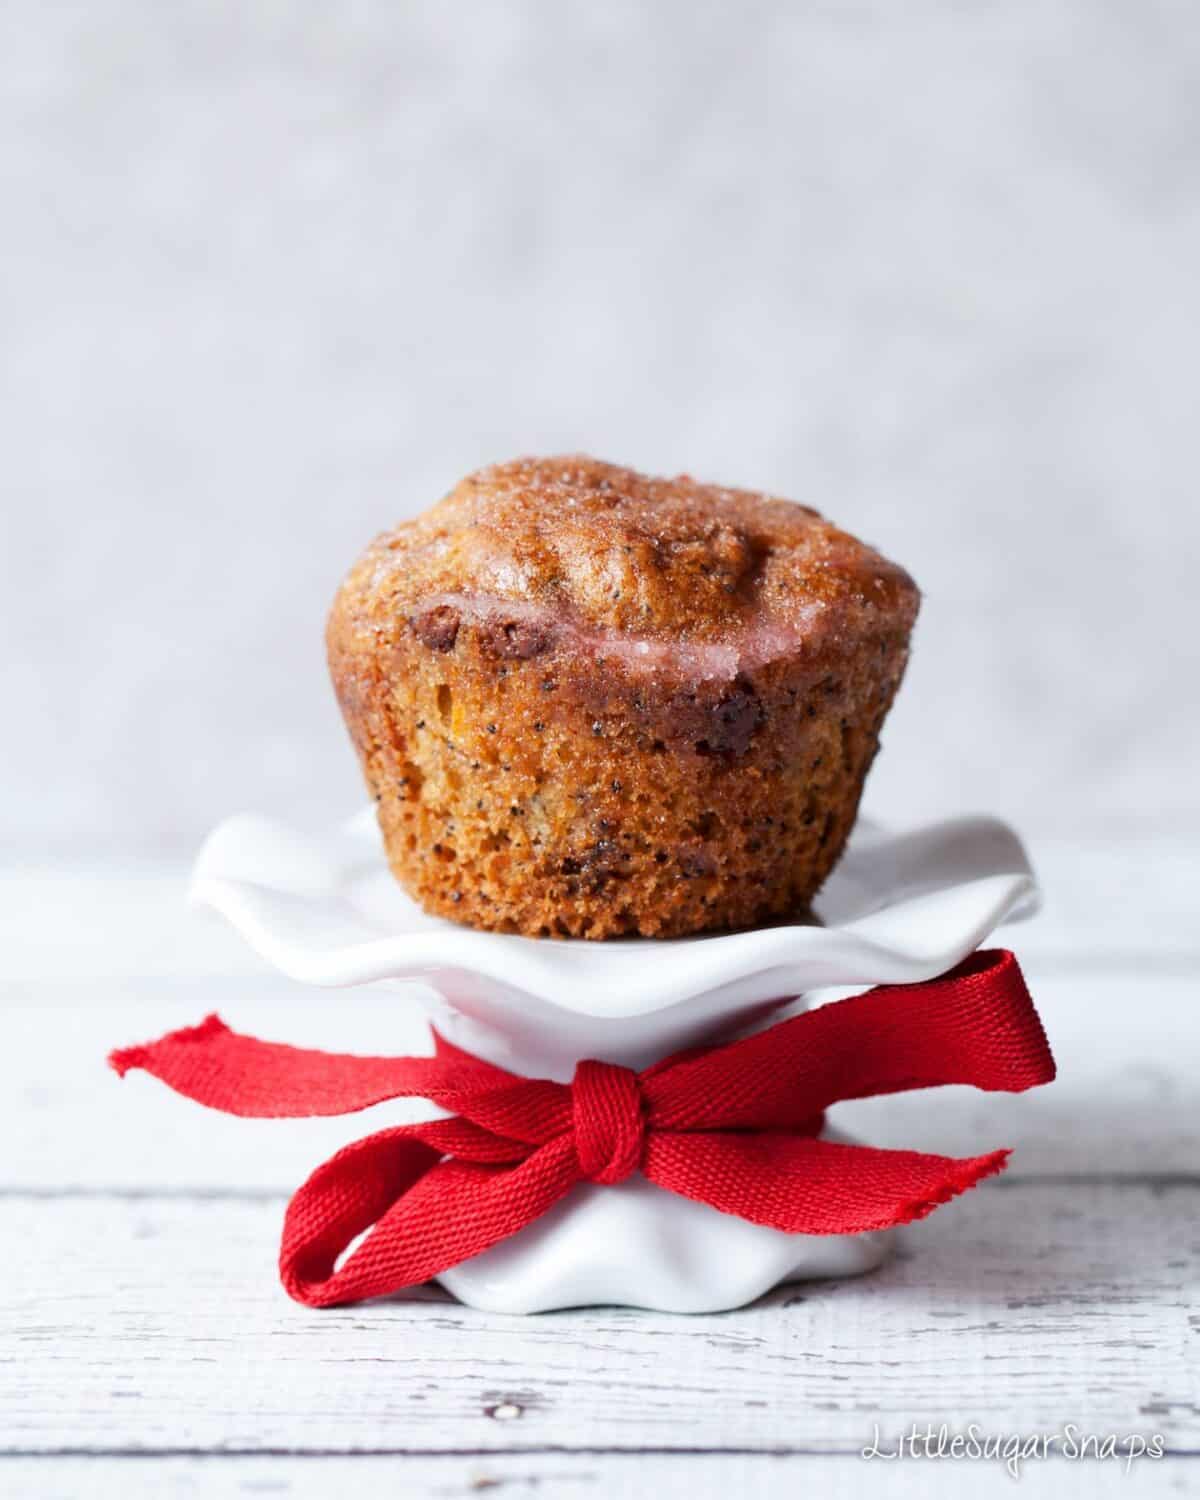 Orange Drizzle Muffin on a small cake stand with a red ribbon.